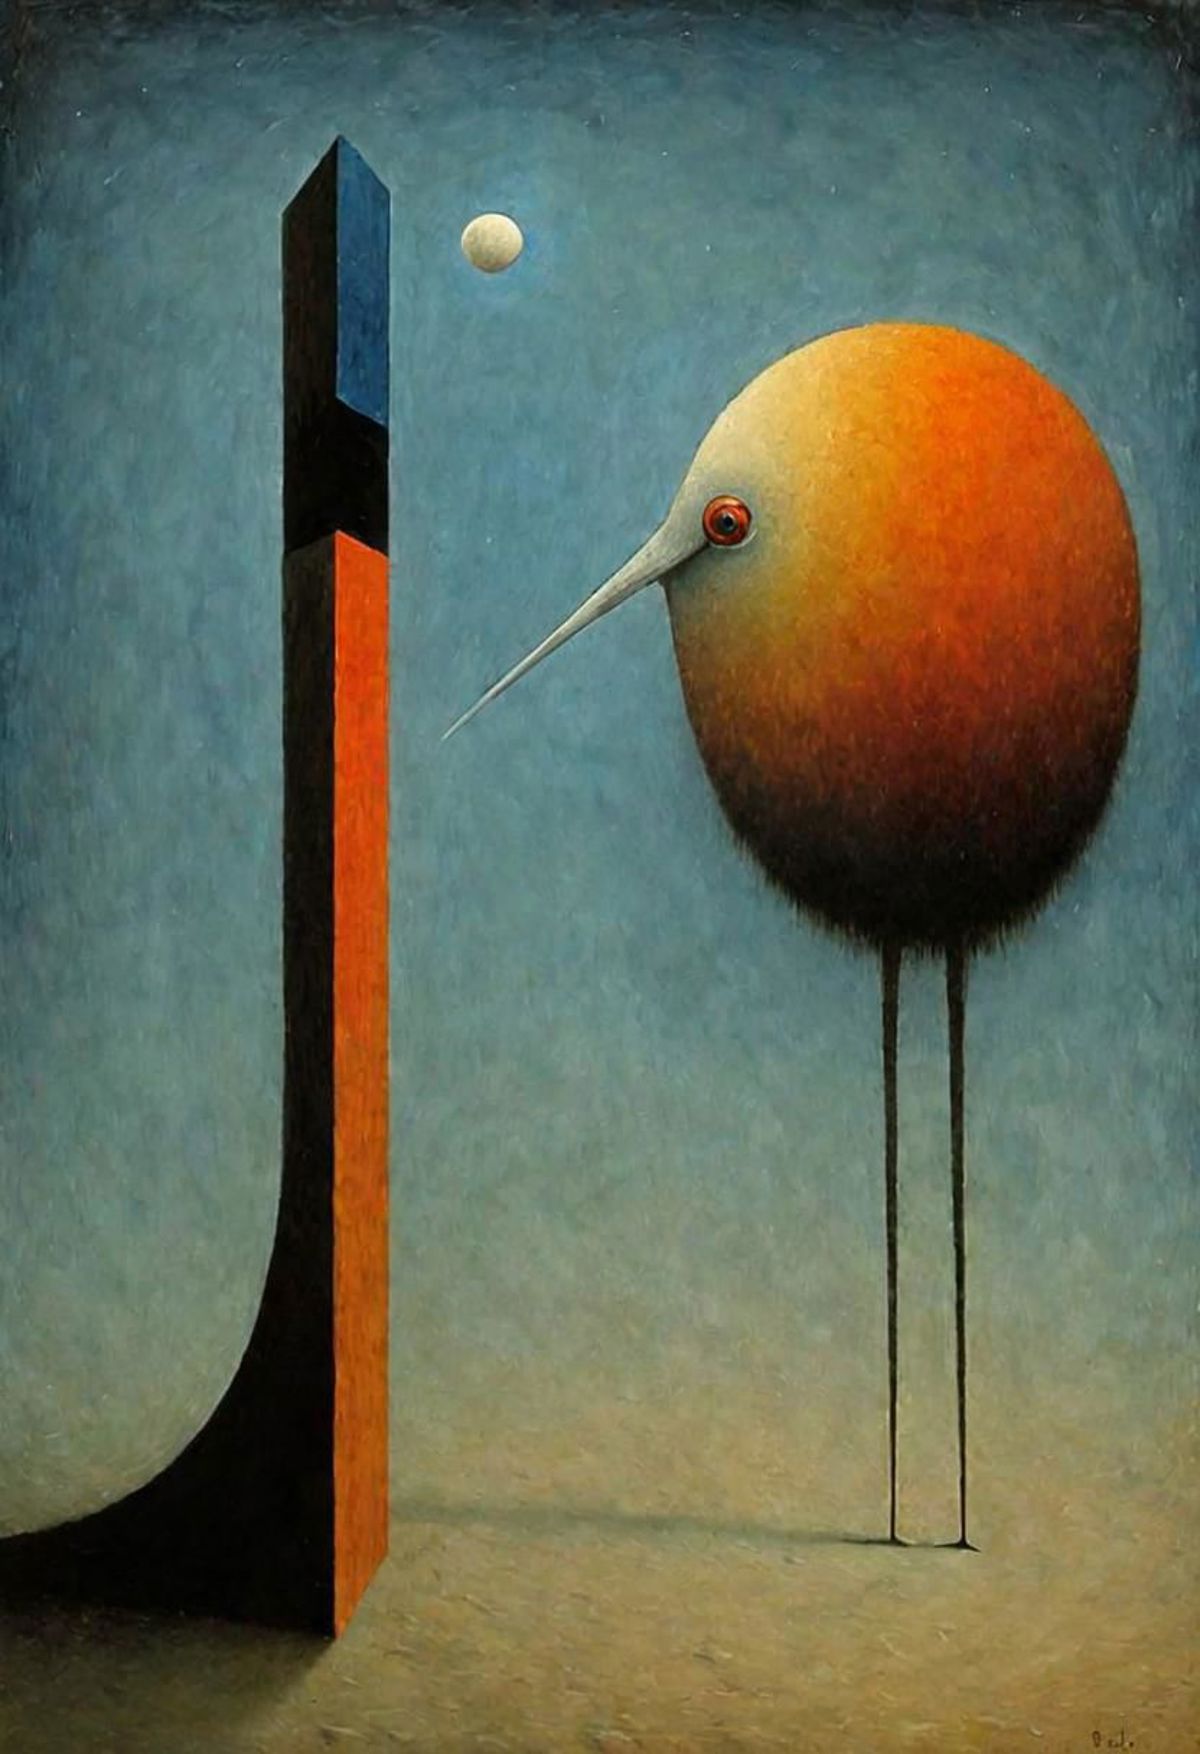 A painting of a bird with a long beak and a large orange ball.